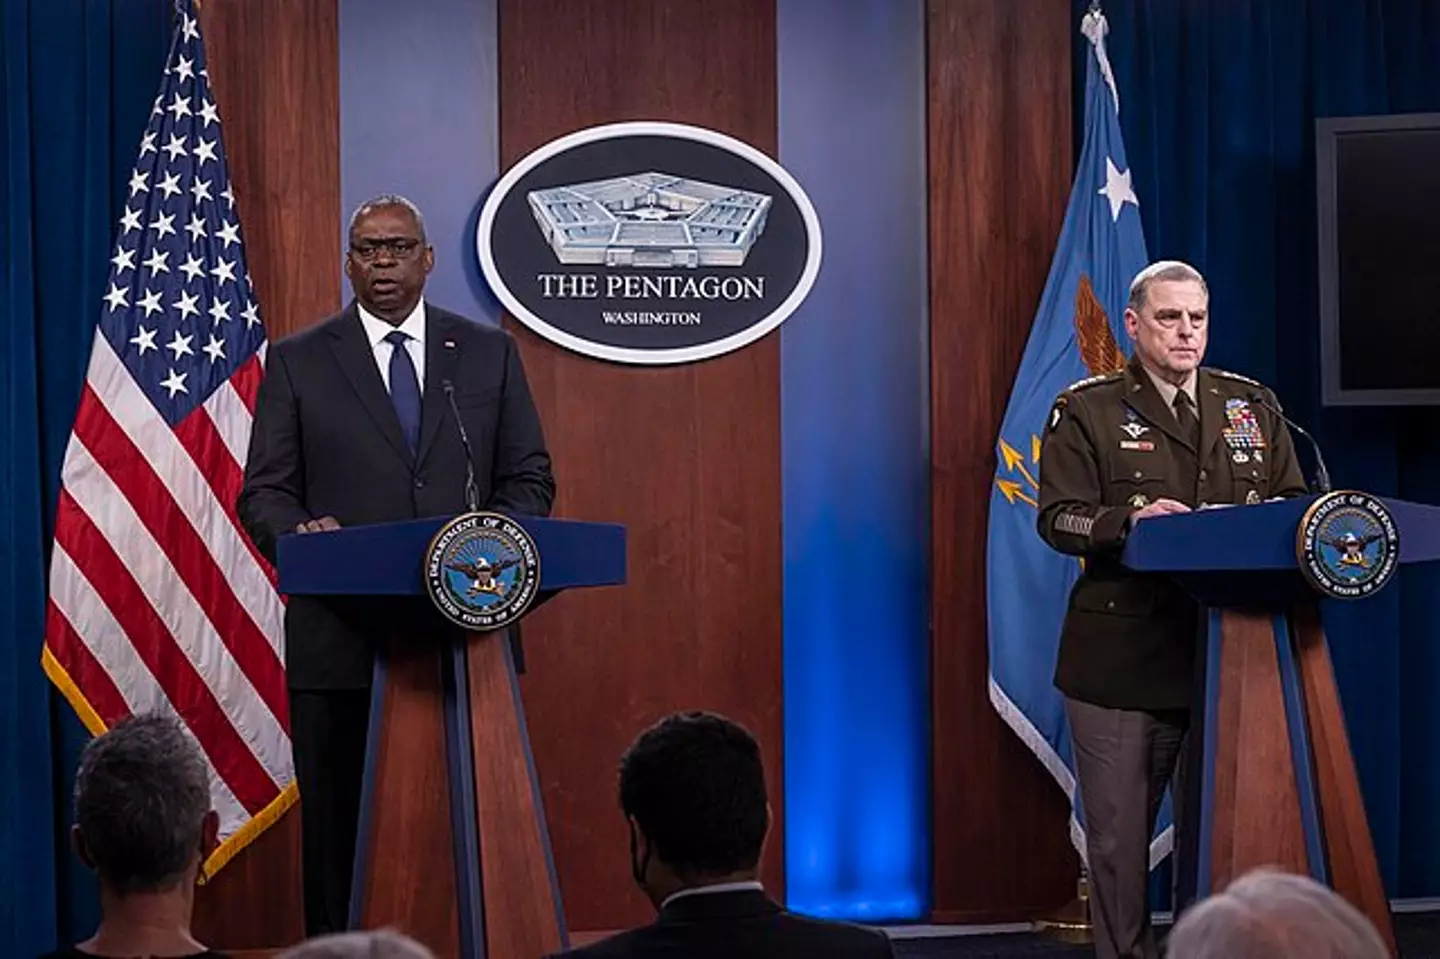 US Defense Secretary Lloyd Austin and Joint Chiefs Chairman Mark Milley spoke about the situation earlier this week.